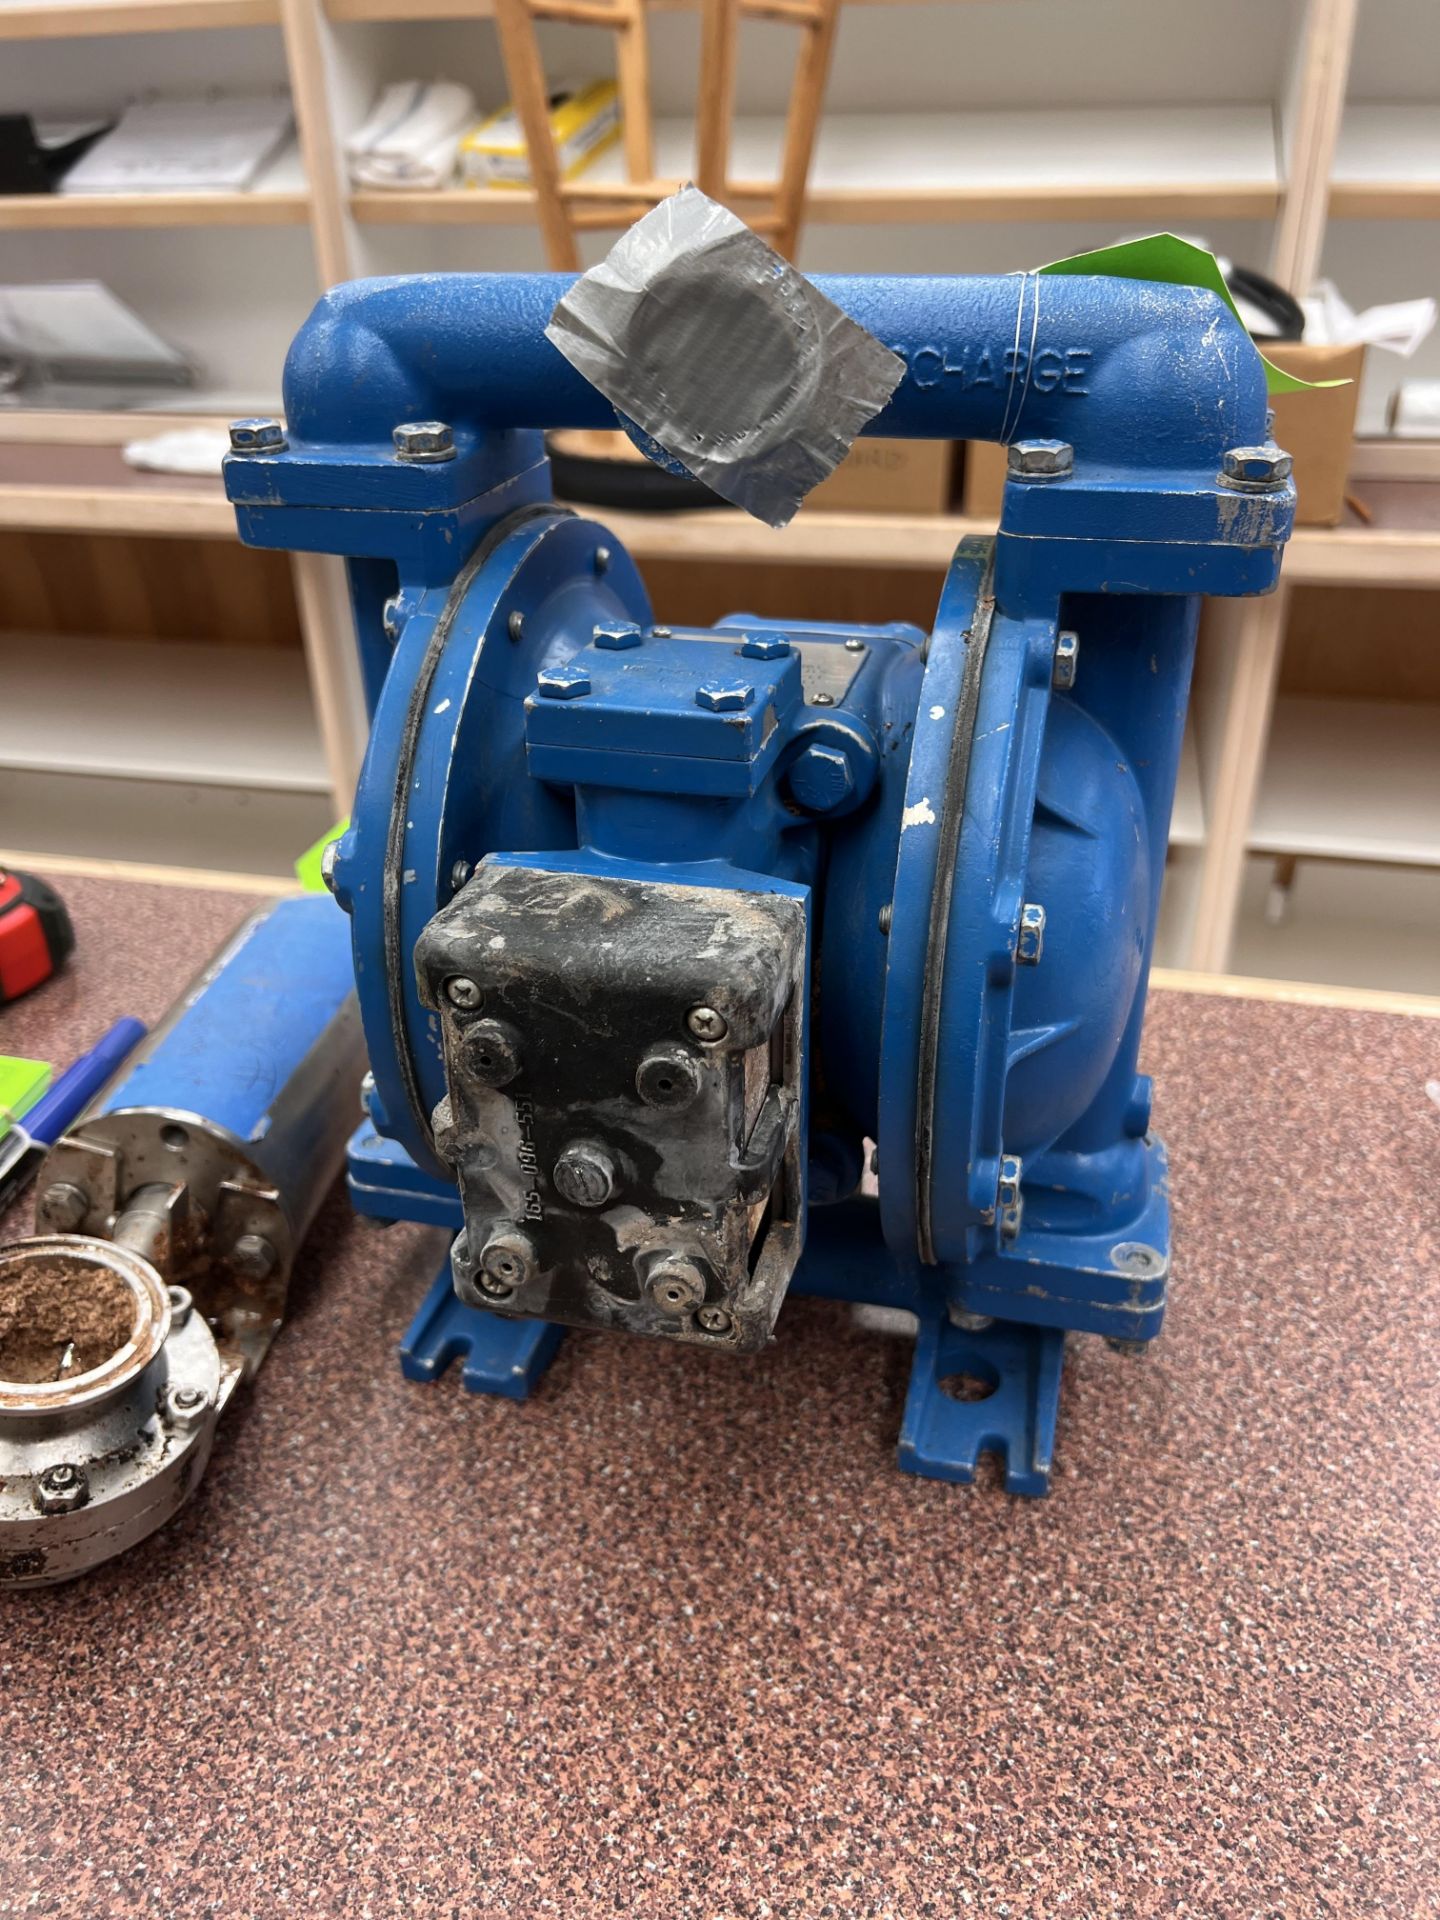 SANDPIPER 1" BELLOW DIAPHRAGM PUMP, S/N 1981368, 125 PSI, INCLUDES EGMO PNEUMATIC 2" S/S BUTTERFLY - Image 4 of 4